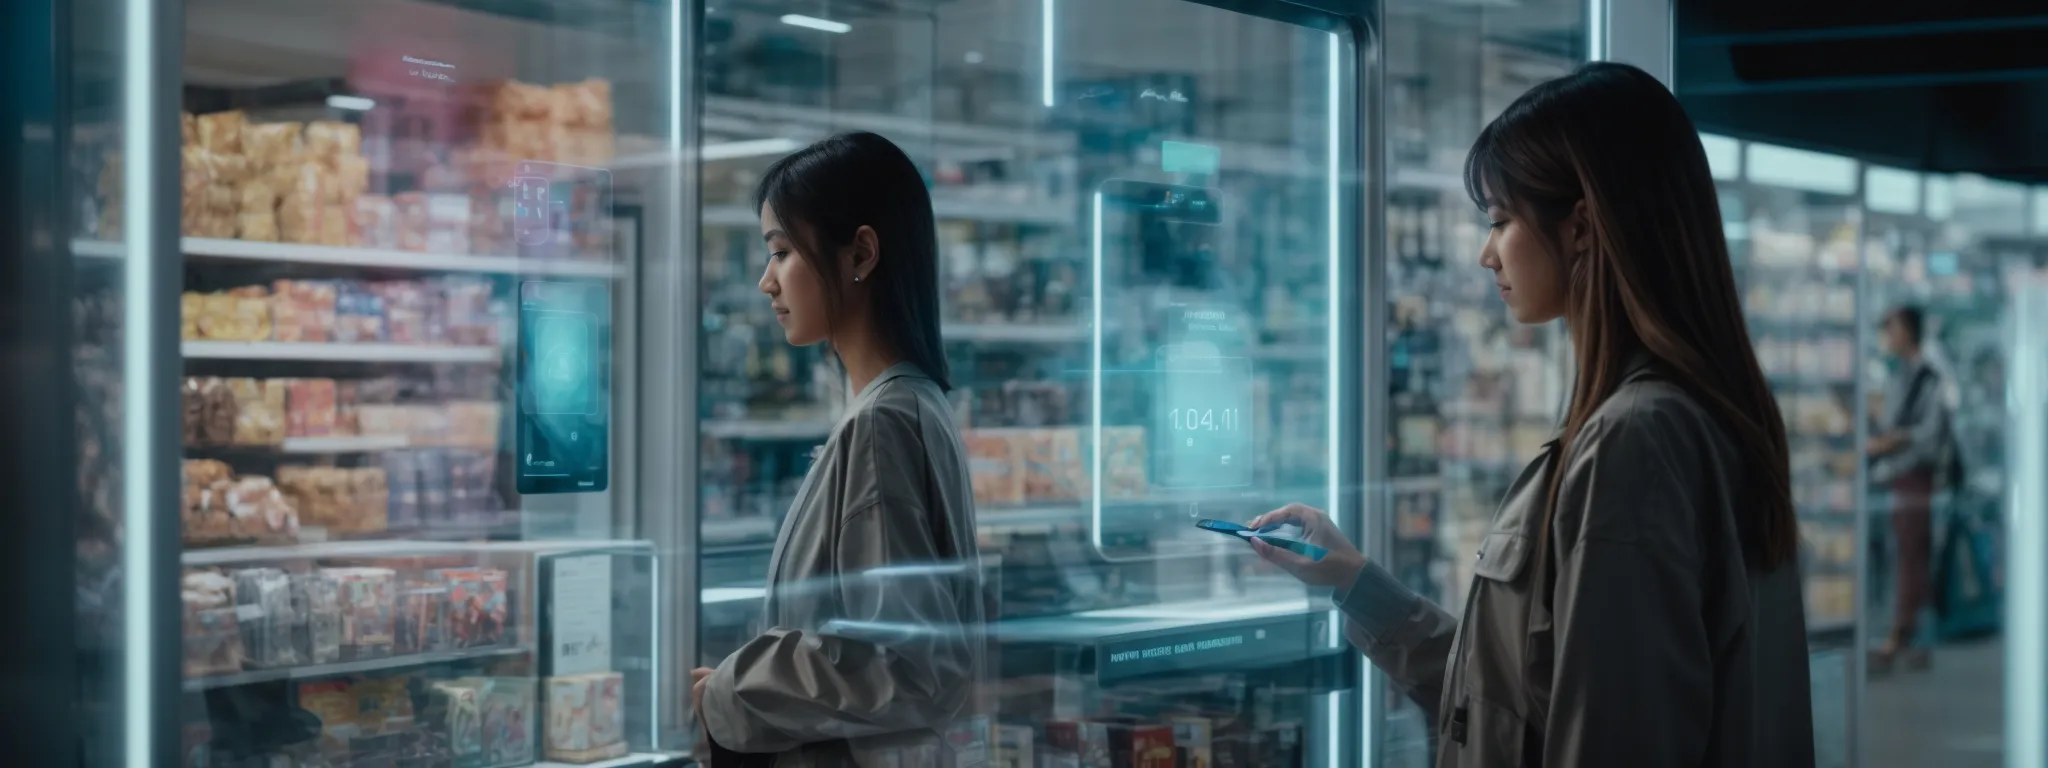 a futuristic shopper interacts with a holographic interface displaying an array of online products.